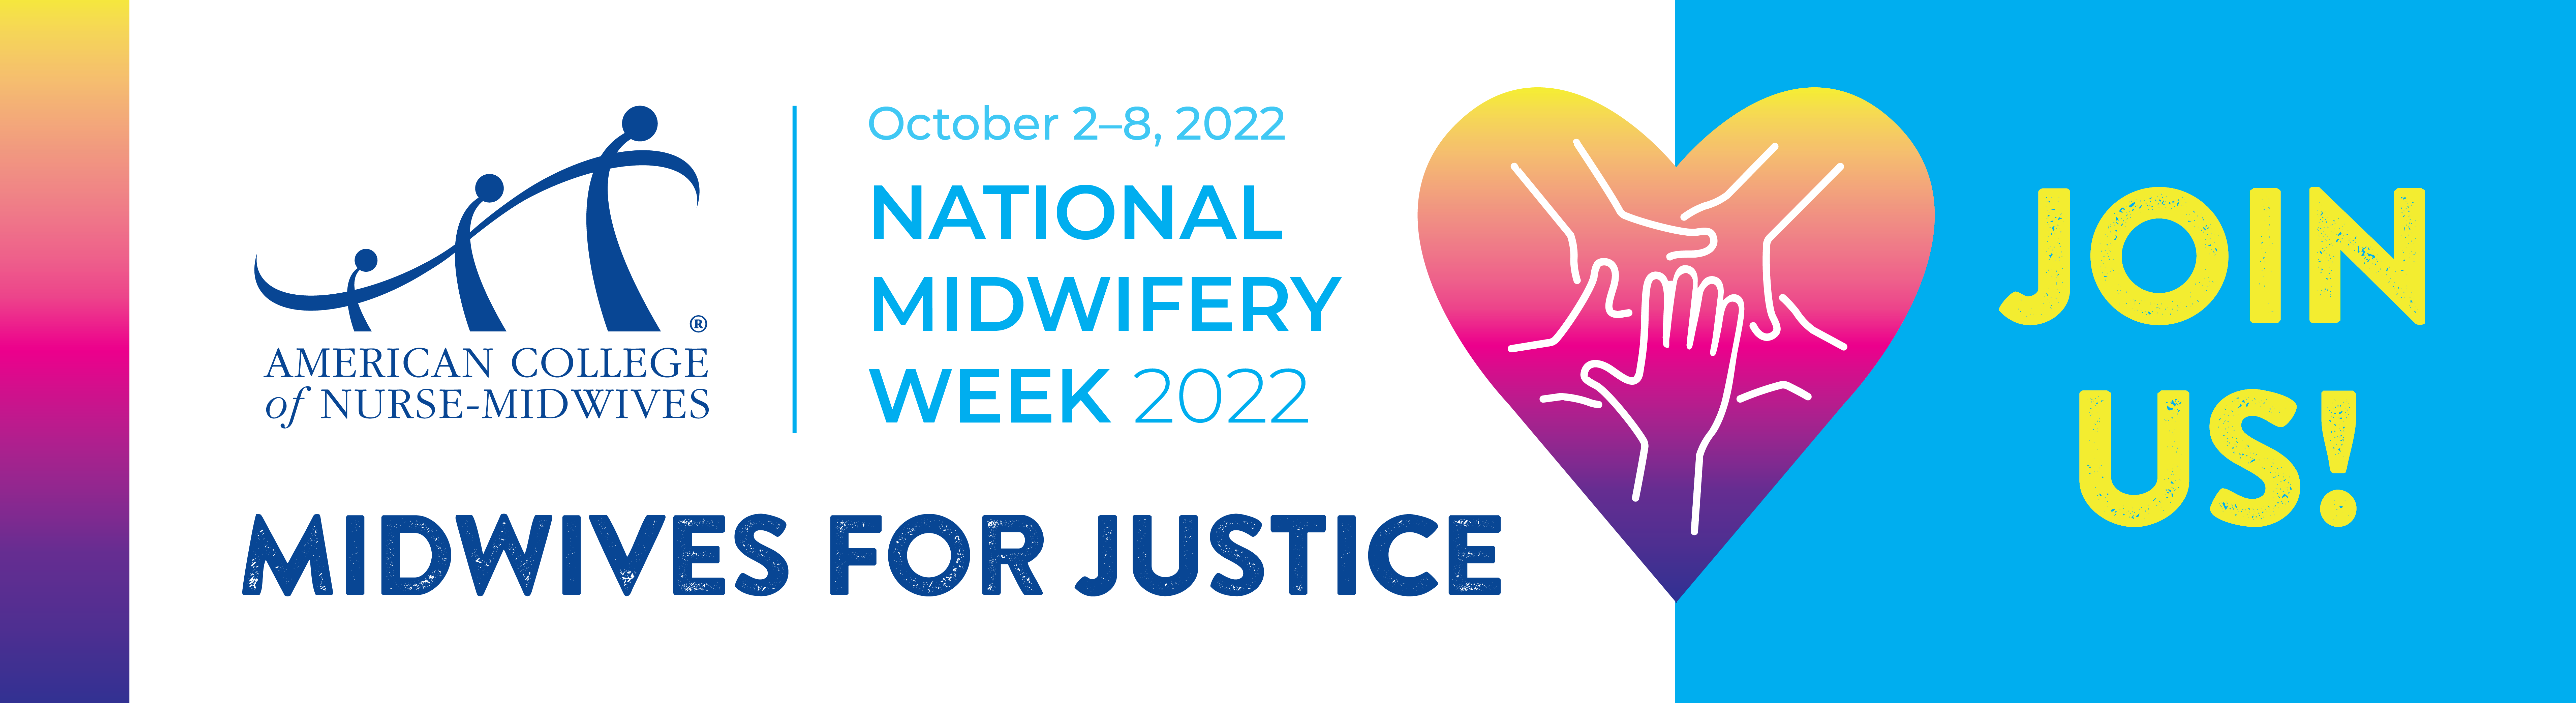 NMW2022 - Midwives for Justice - Banner 3